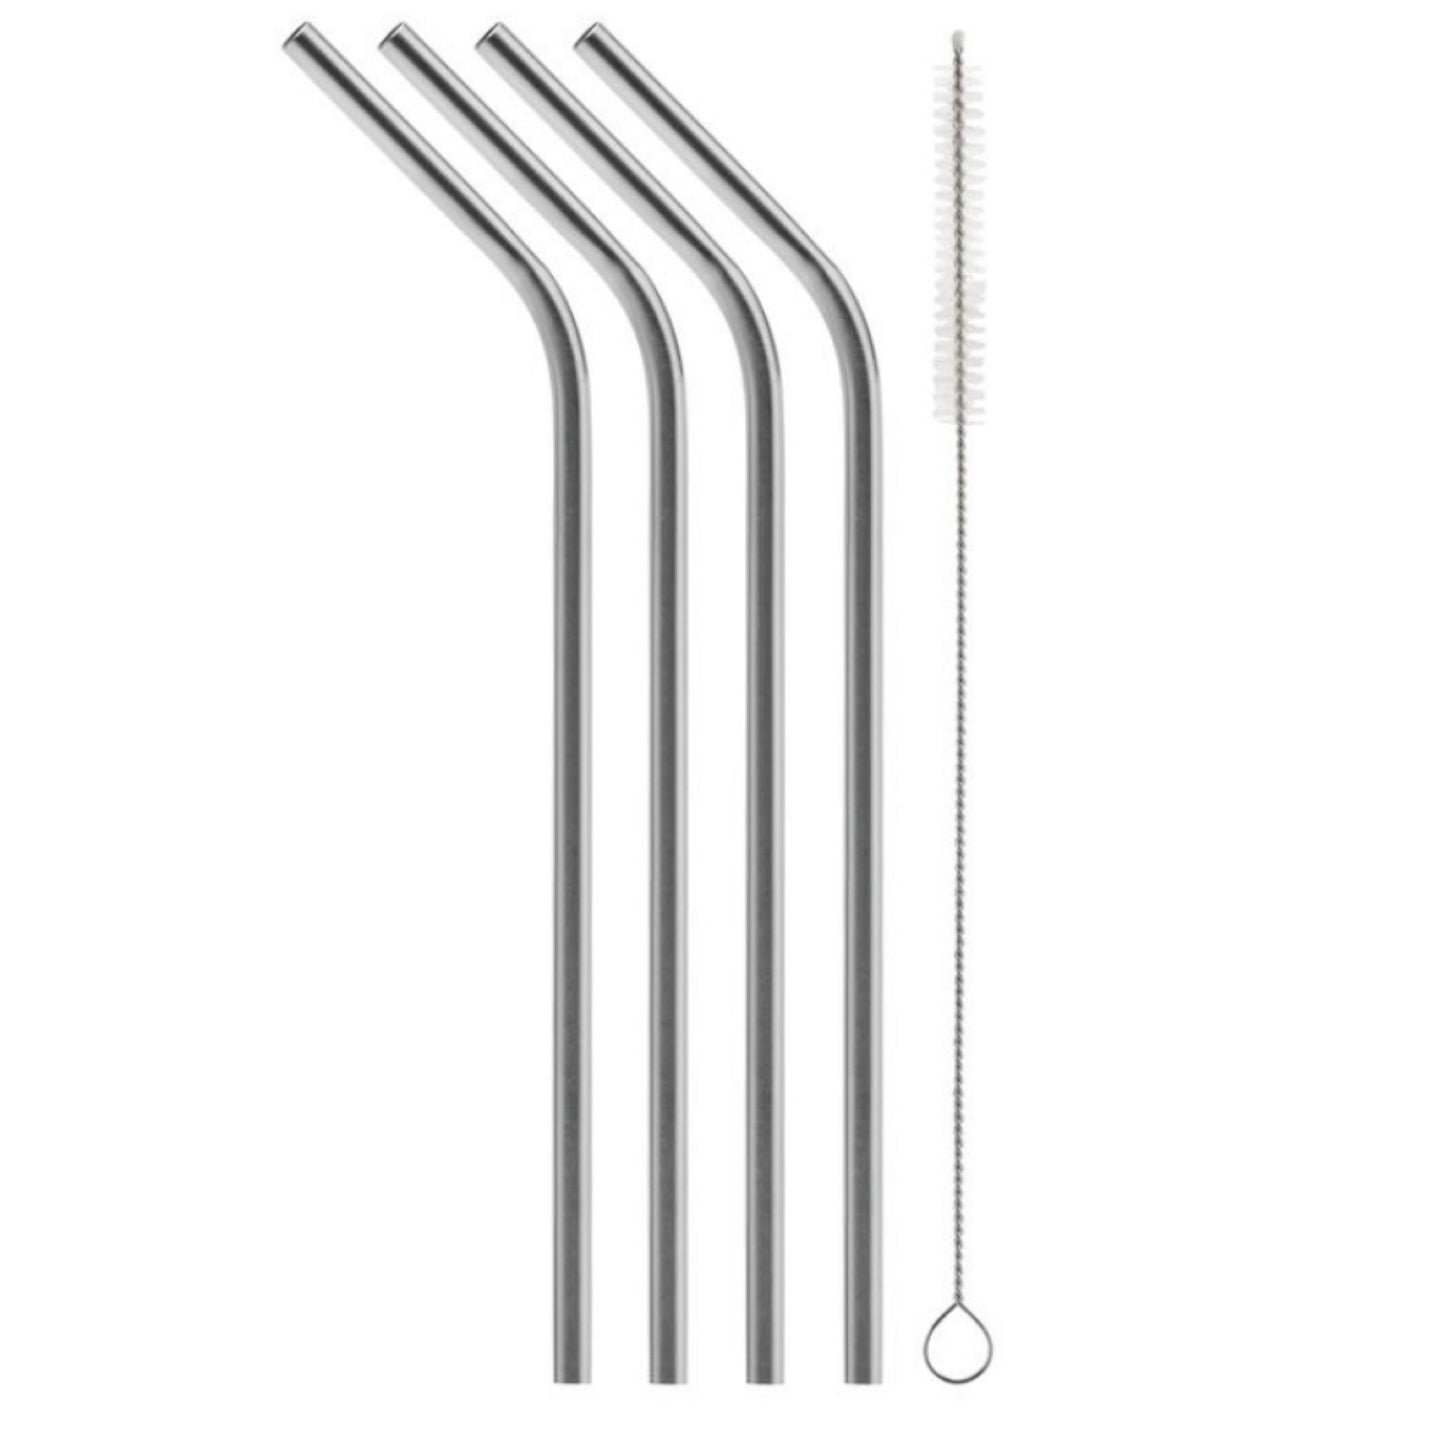 Bent Stainless Steel Straw-8.5” 4 Pack Plus Cleaning Brush